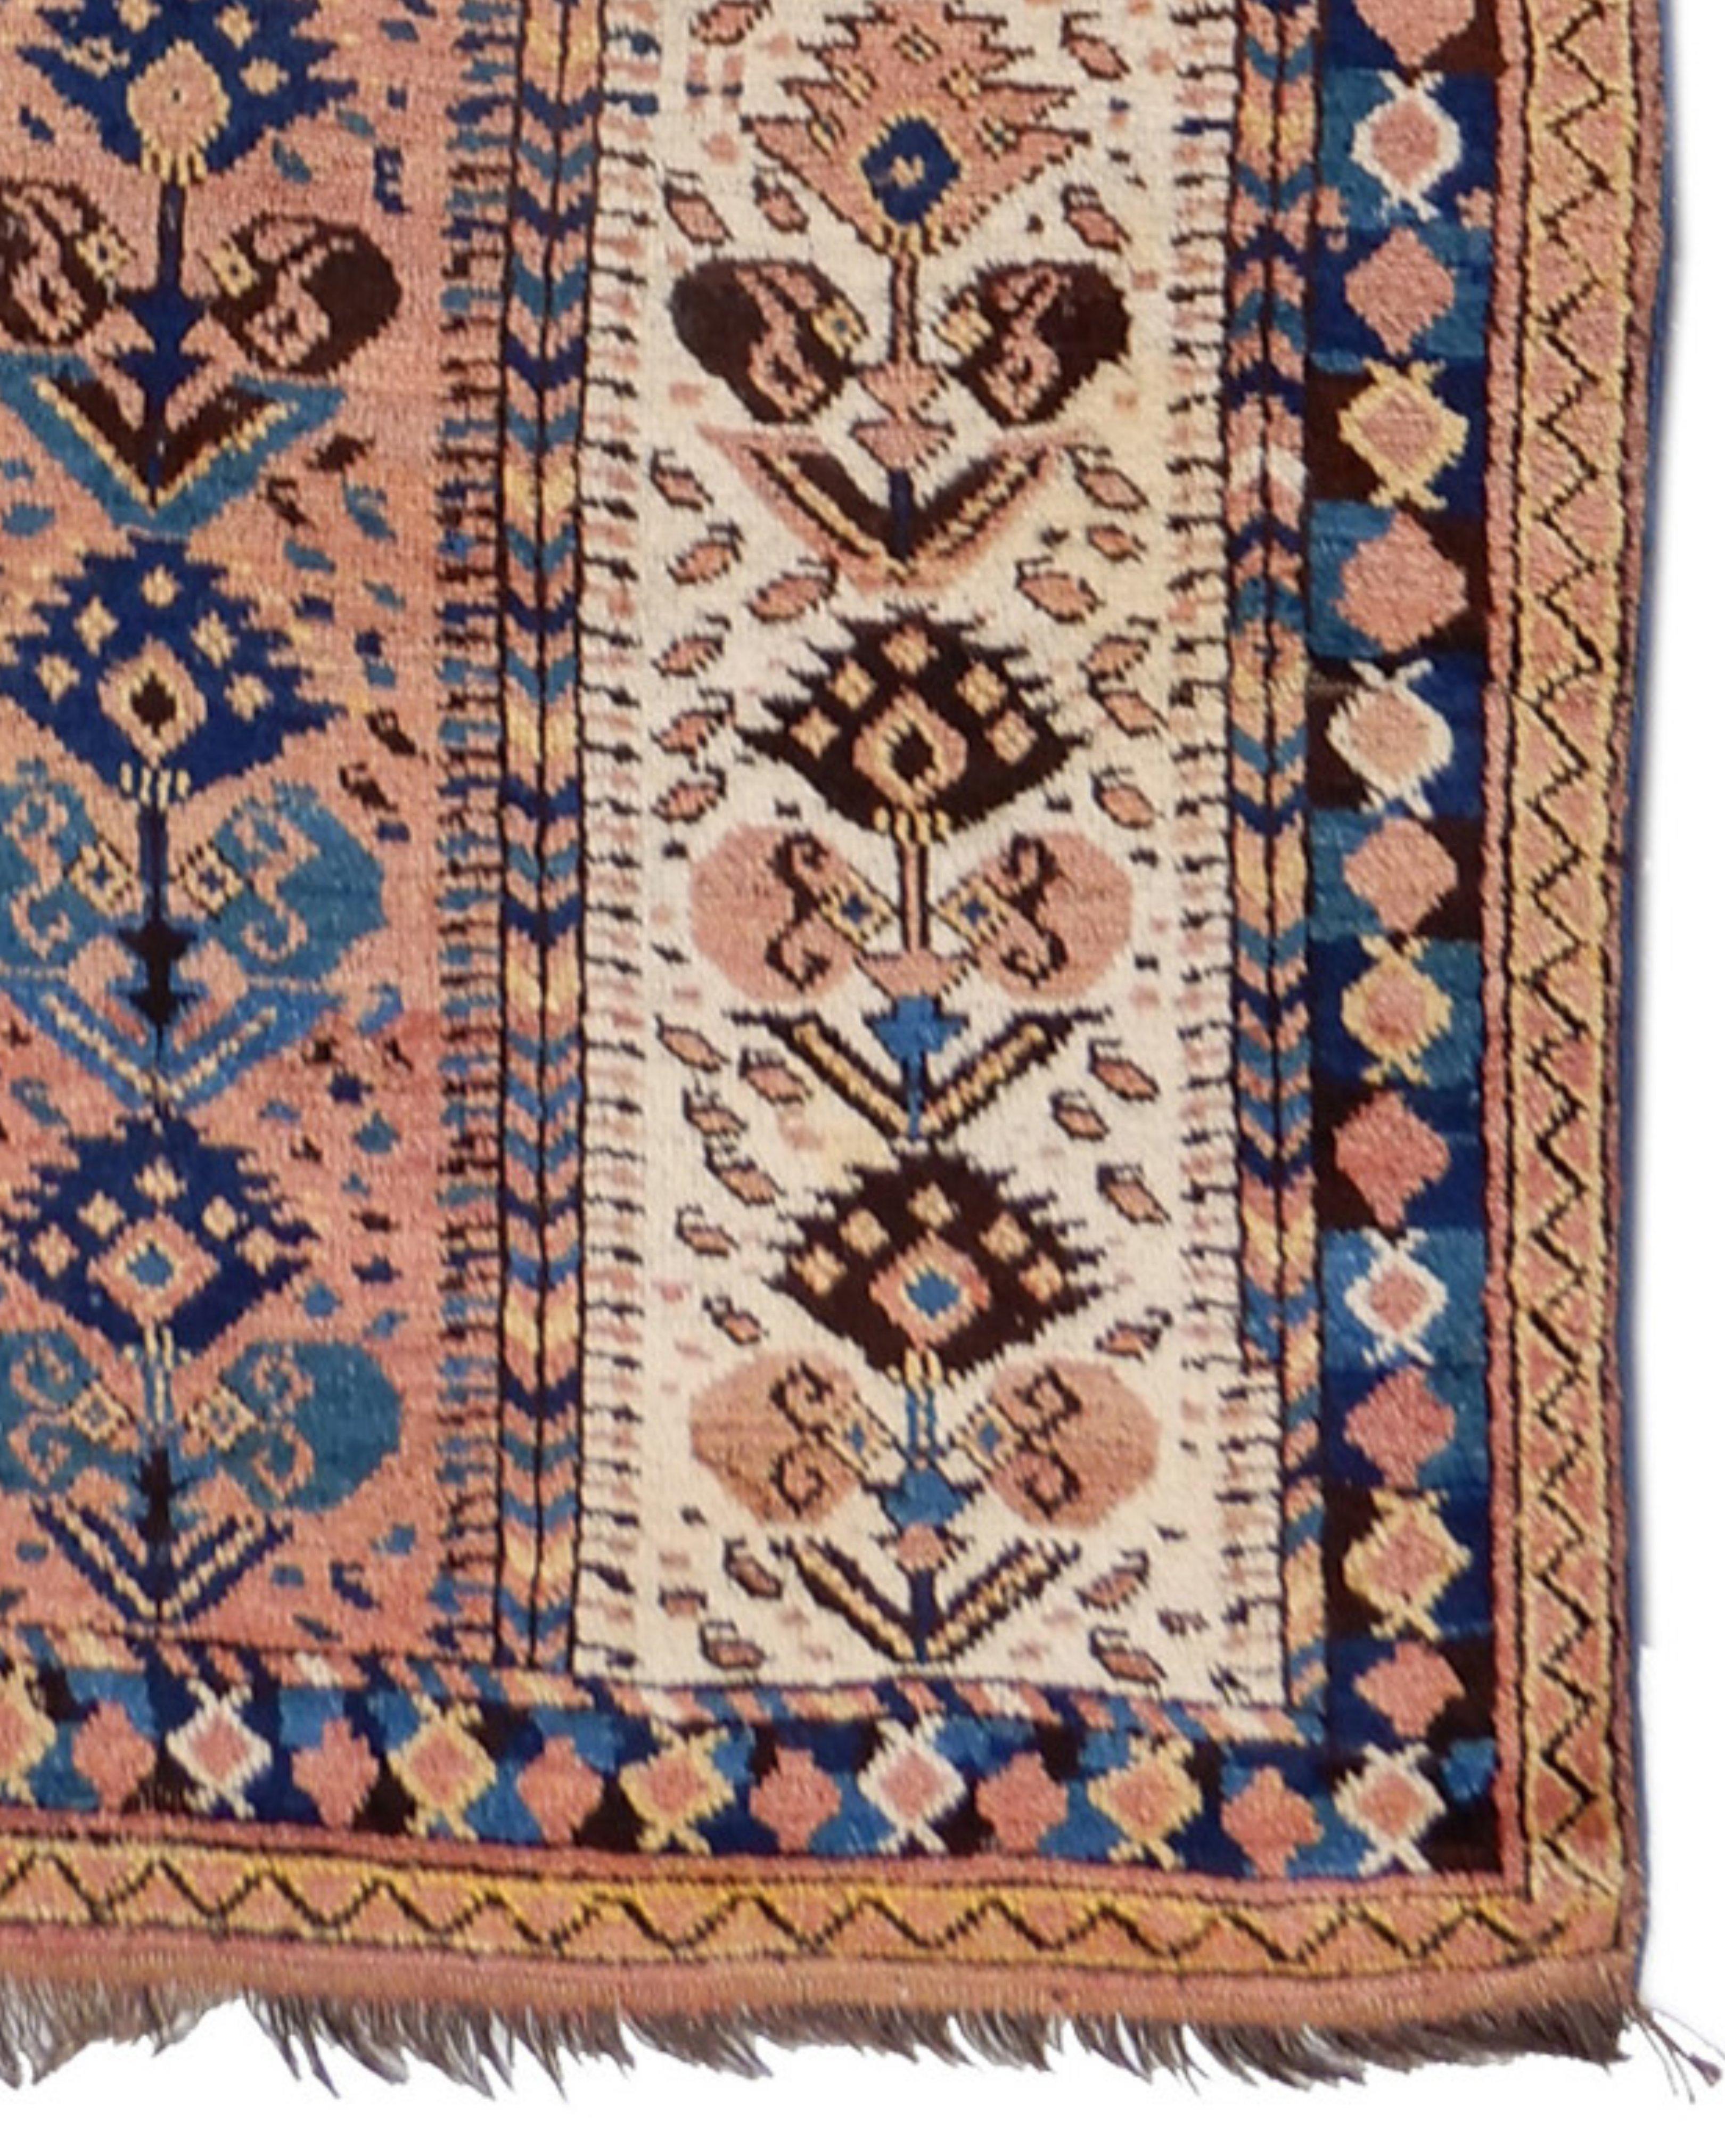 Antique Bashir Prayer Rug, c. 1900 In Excellent Condition For Sale In San Francisco, CA